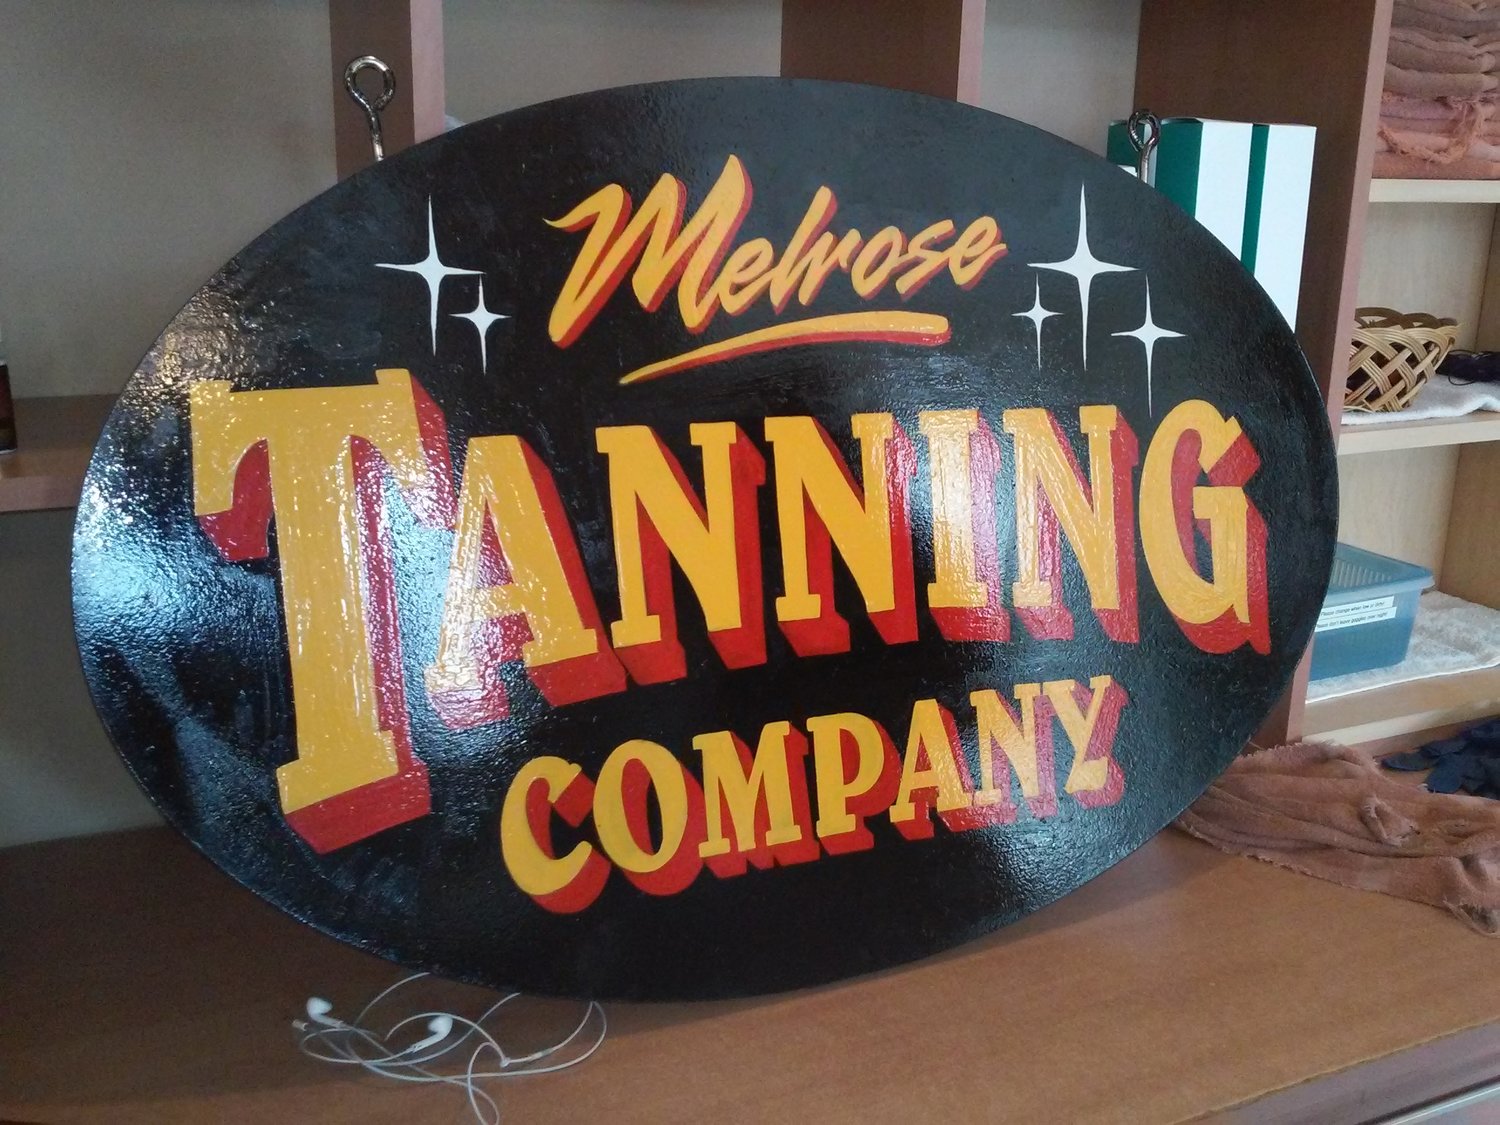 Melrose Tanning Company